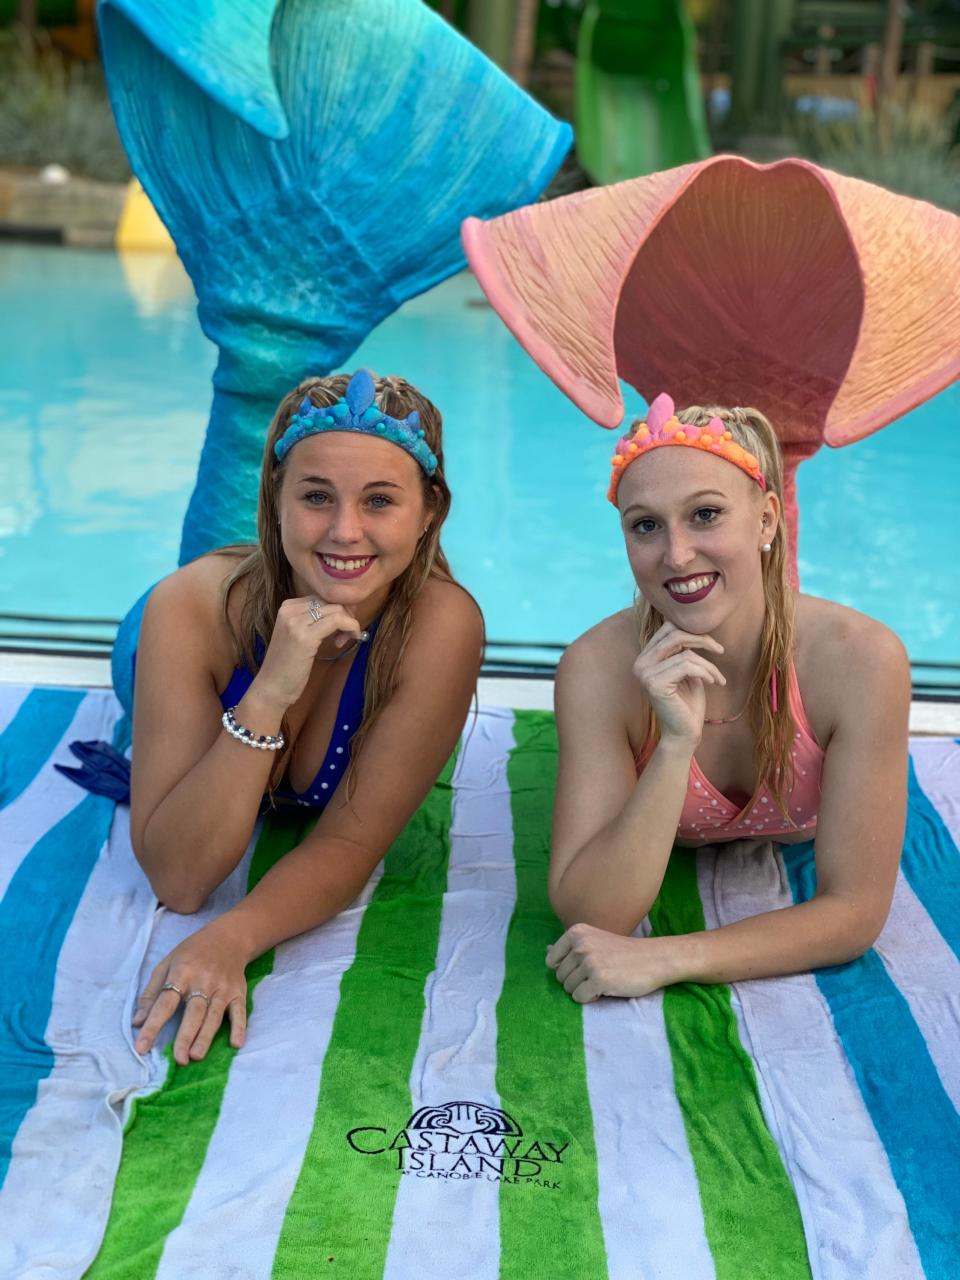 On Fridays and Saturdays, a few tickets are available to swim with a mermaid at Canobie Lake's Castaway Island water park.